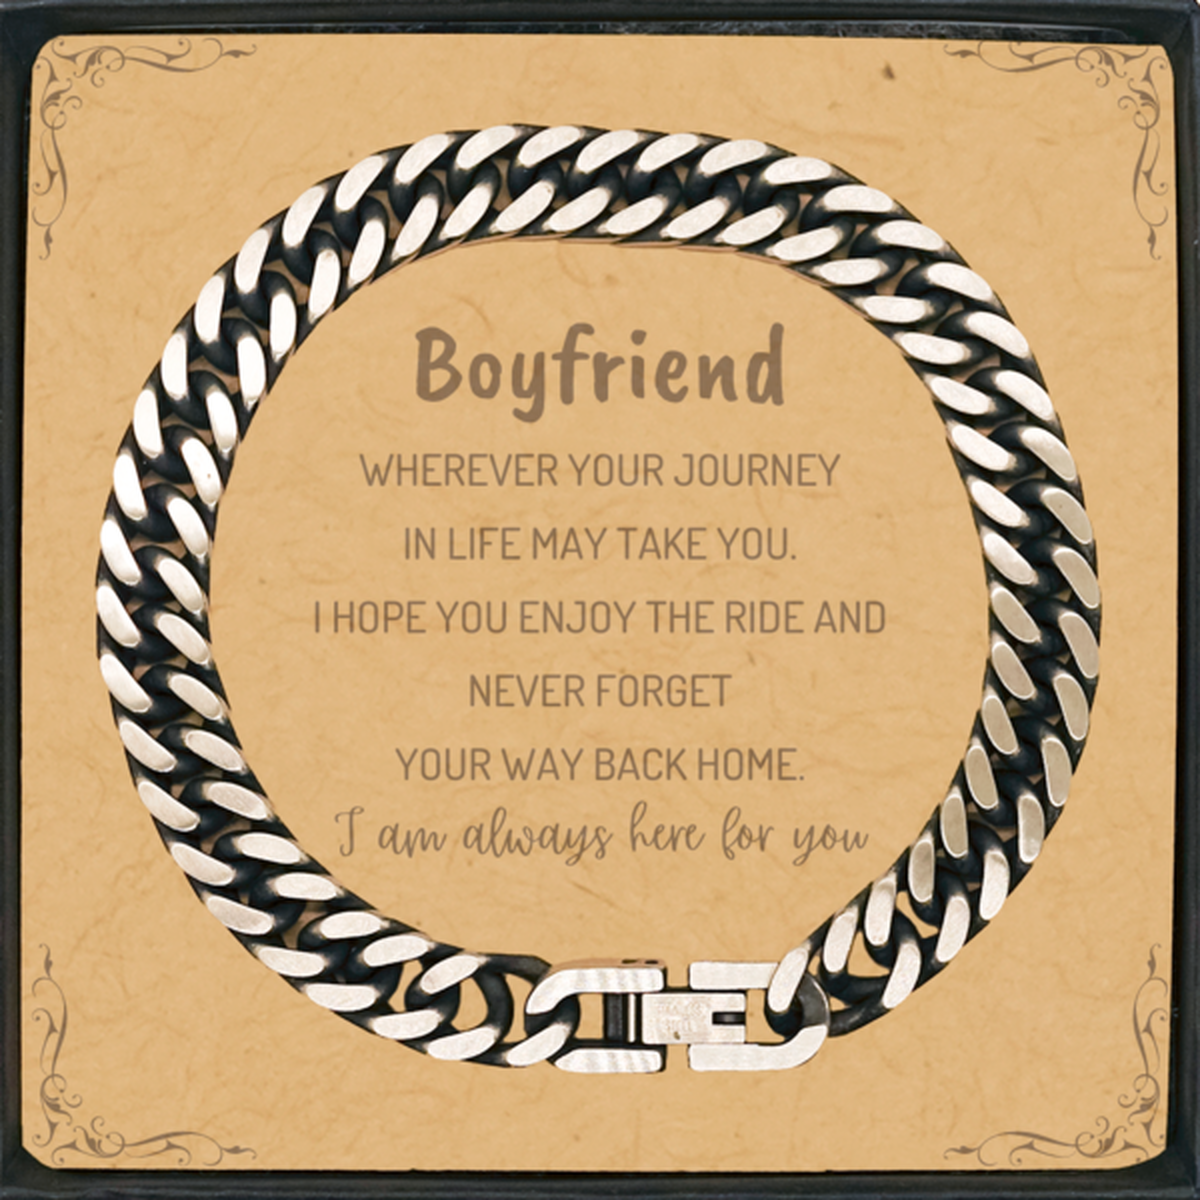 Boyfriend wherever your journey in life may take you, I am always here for you Boyfriend Cuban Link Chain Bracelet, Awesome Christmas Gifts For Boyfriend Message Card, Boyfriend Birthday Gifts for Men Women Family Loved One